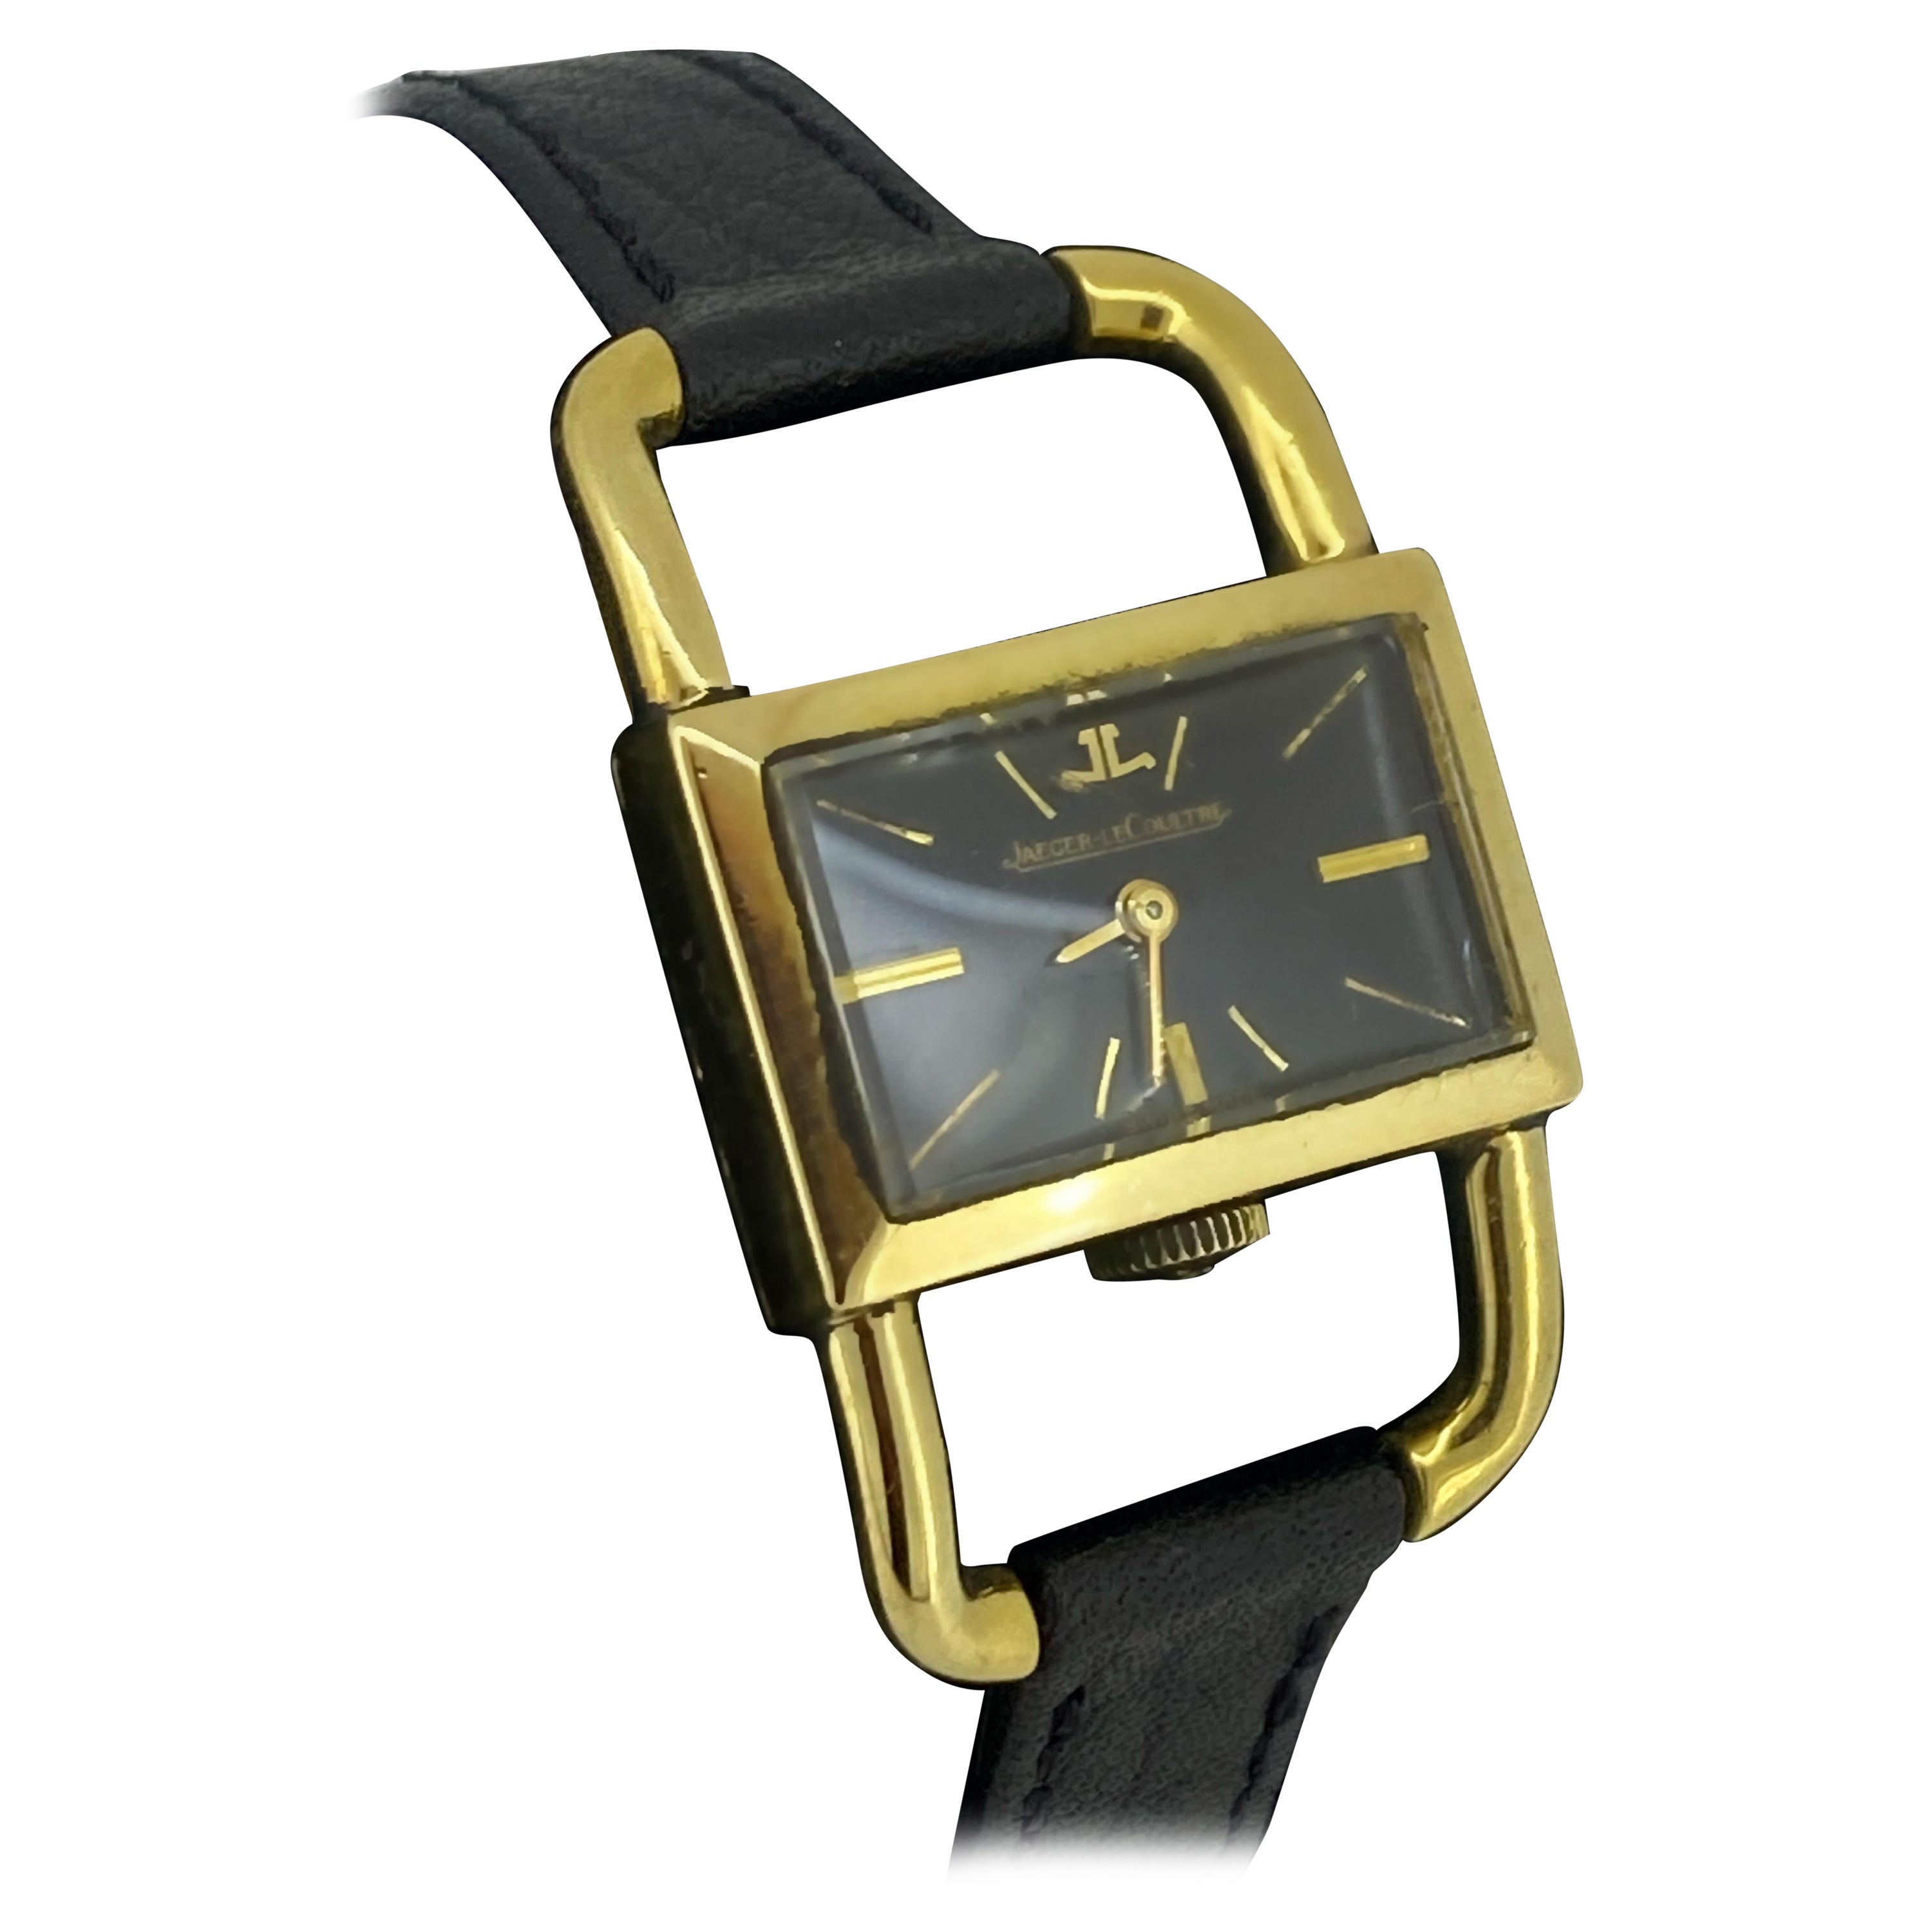 Jaeger-LeCoultre Értier Luchetto 18K Gold, Onyx Dial, Stirrup Lugs Ladies Watch For Sale